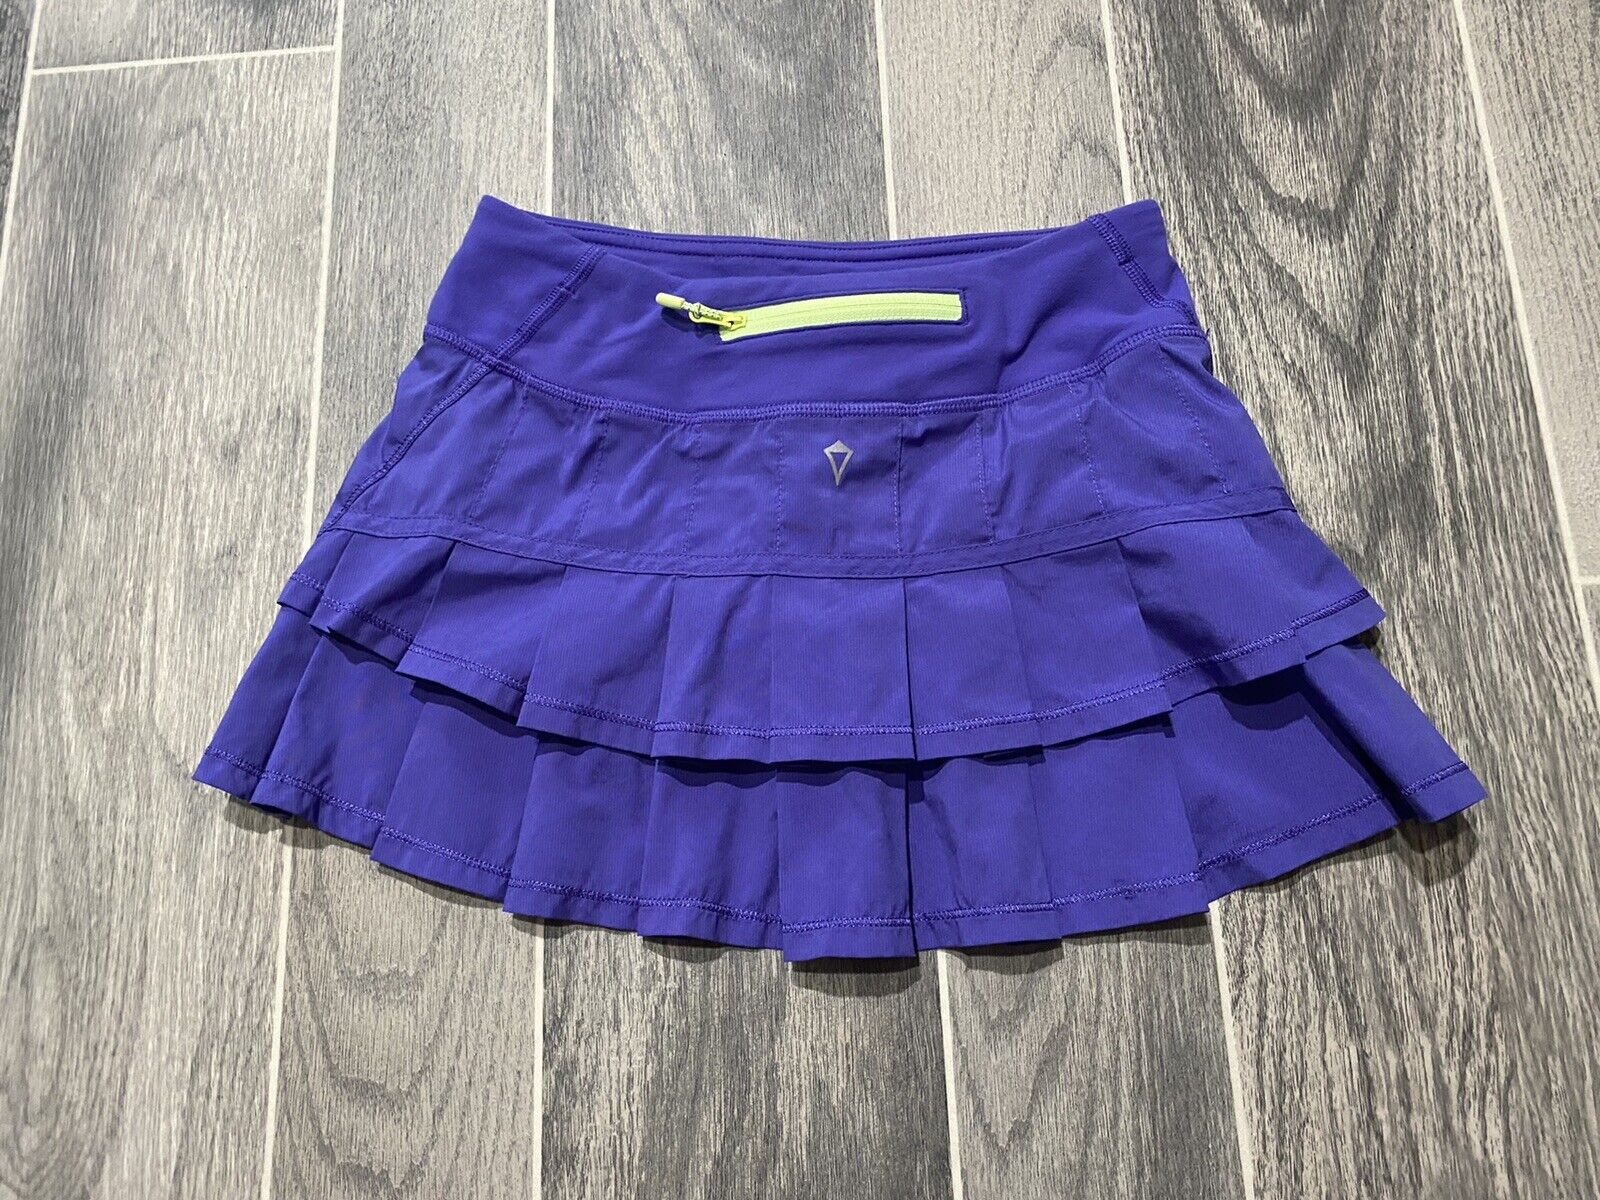 IVIVVA Max 83% OFF By Lululemon Set The Safety and trust Pace Purple Skirt Run Size Tennis